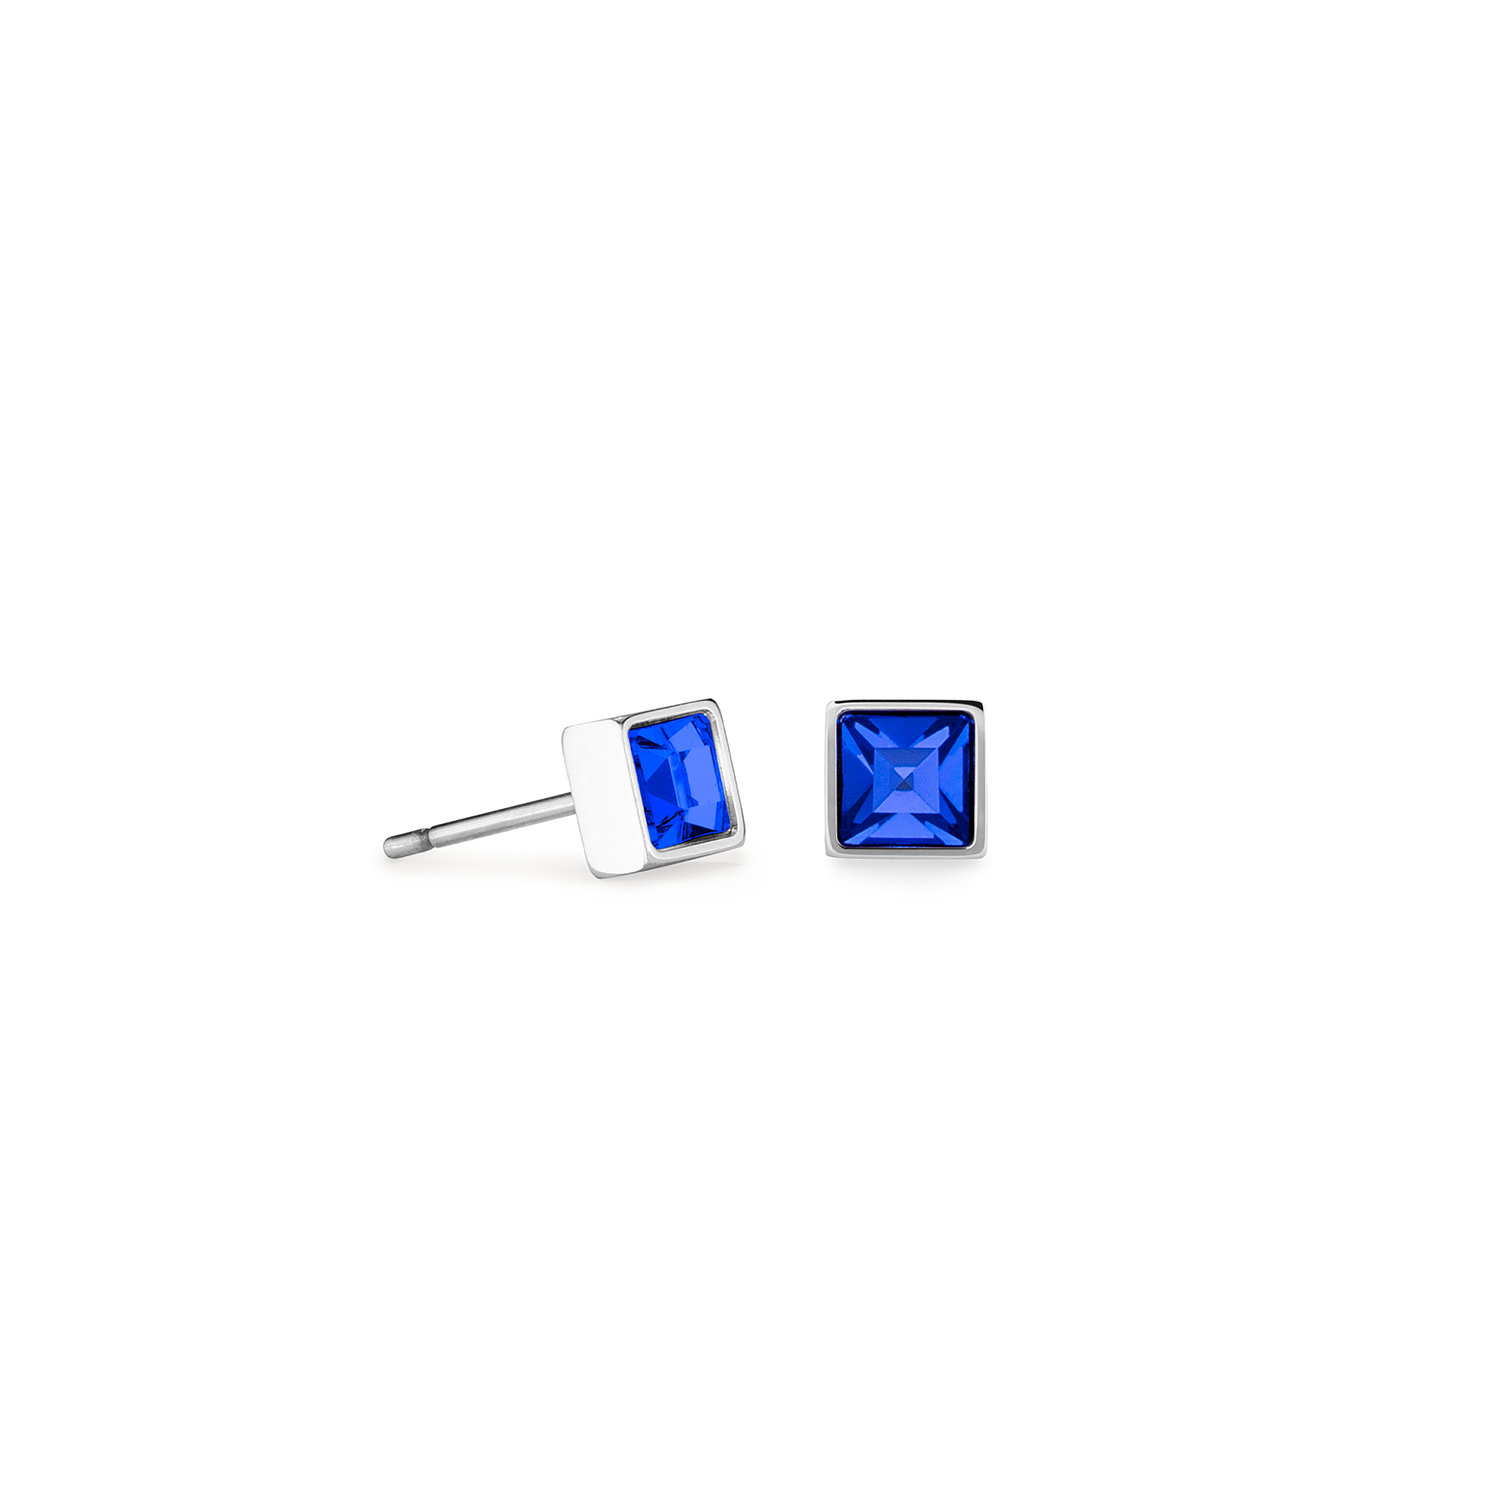 Brilliant Square Small Stud Earrings with Crystals 0501/21_0717 - Dark Blue